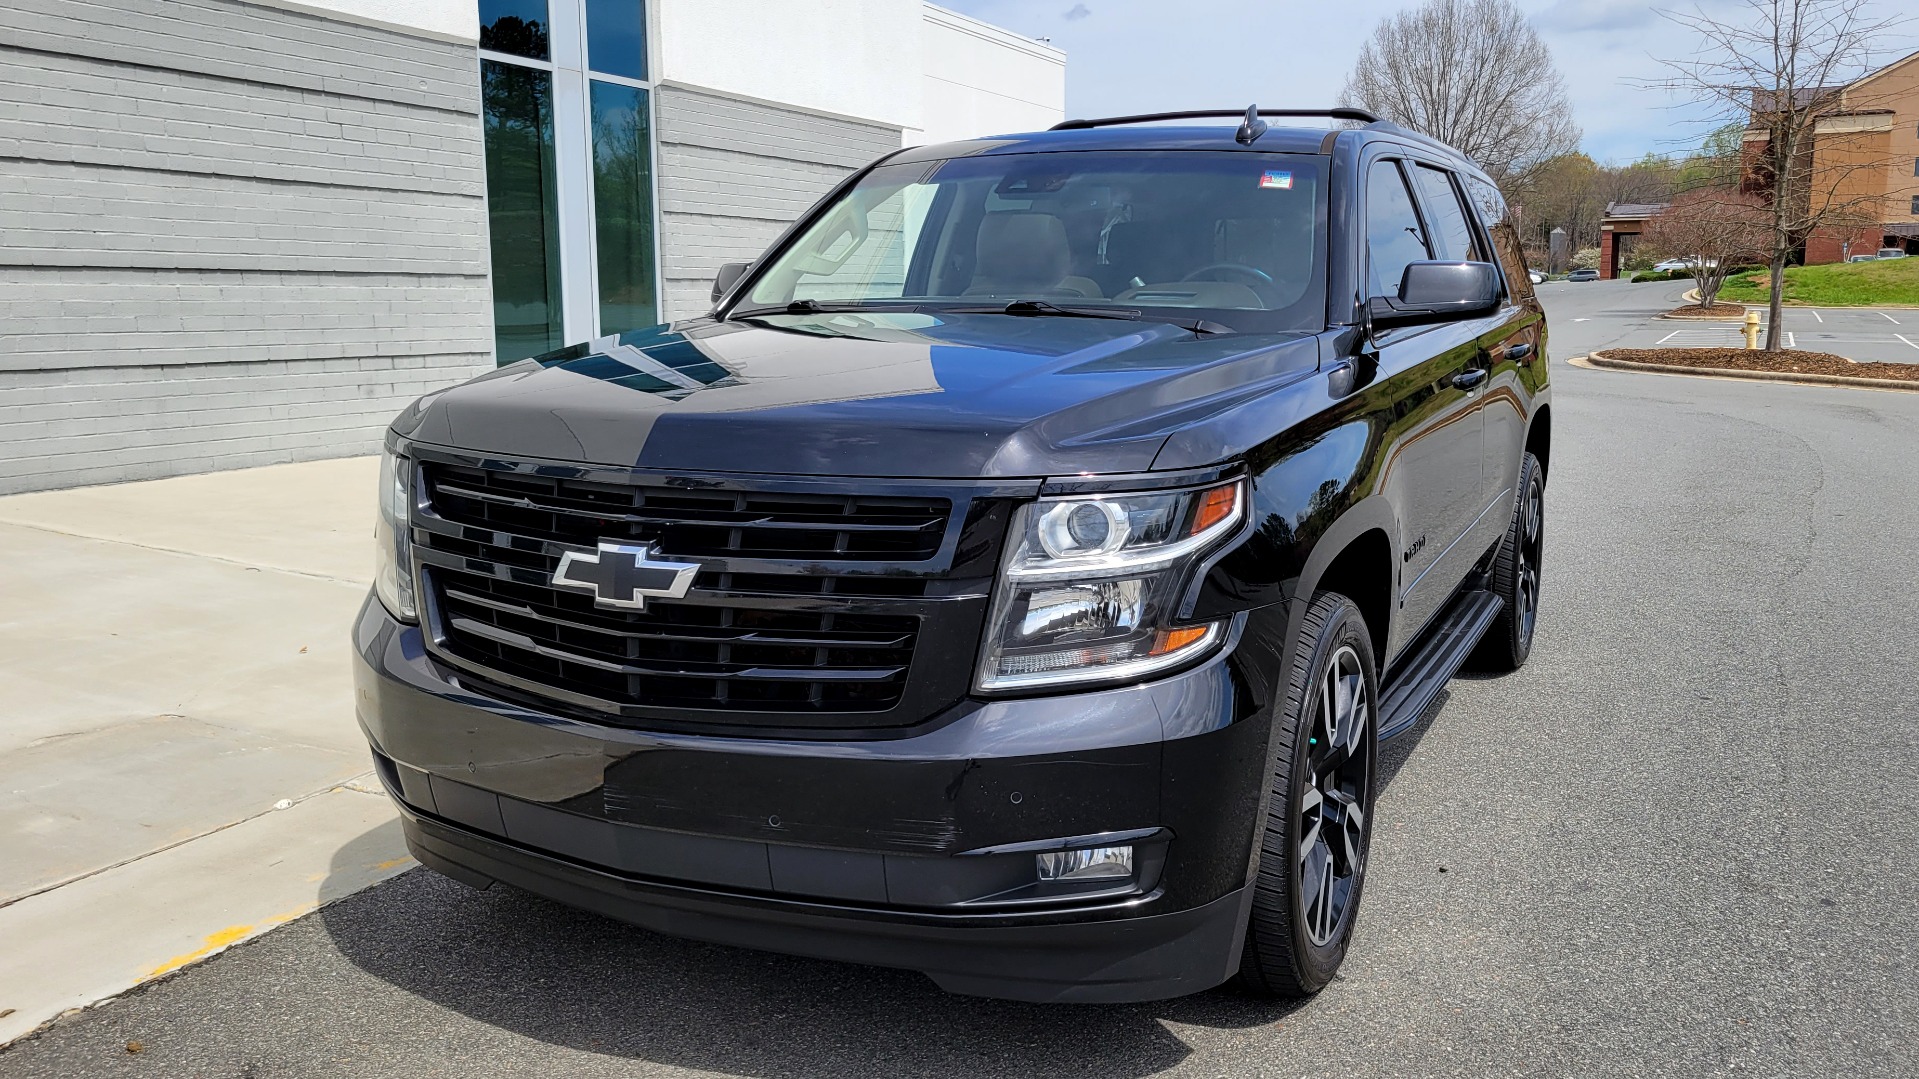 Used 2018 Chevrolet TAHOE PREMIER 6.2L 4X4 / RST EDITION / NAV / DVD / HUD / SUNROOF / REARVIEW for sale Sold at Formula Imports in Charlotte NC 28227 3